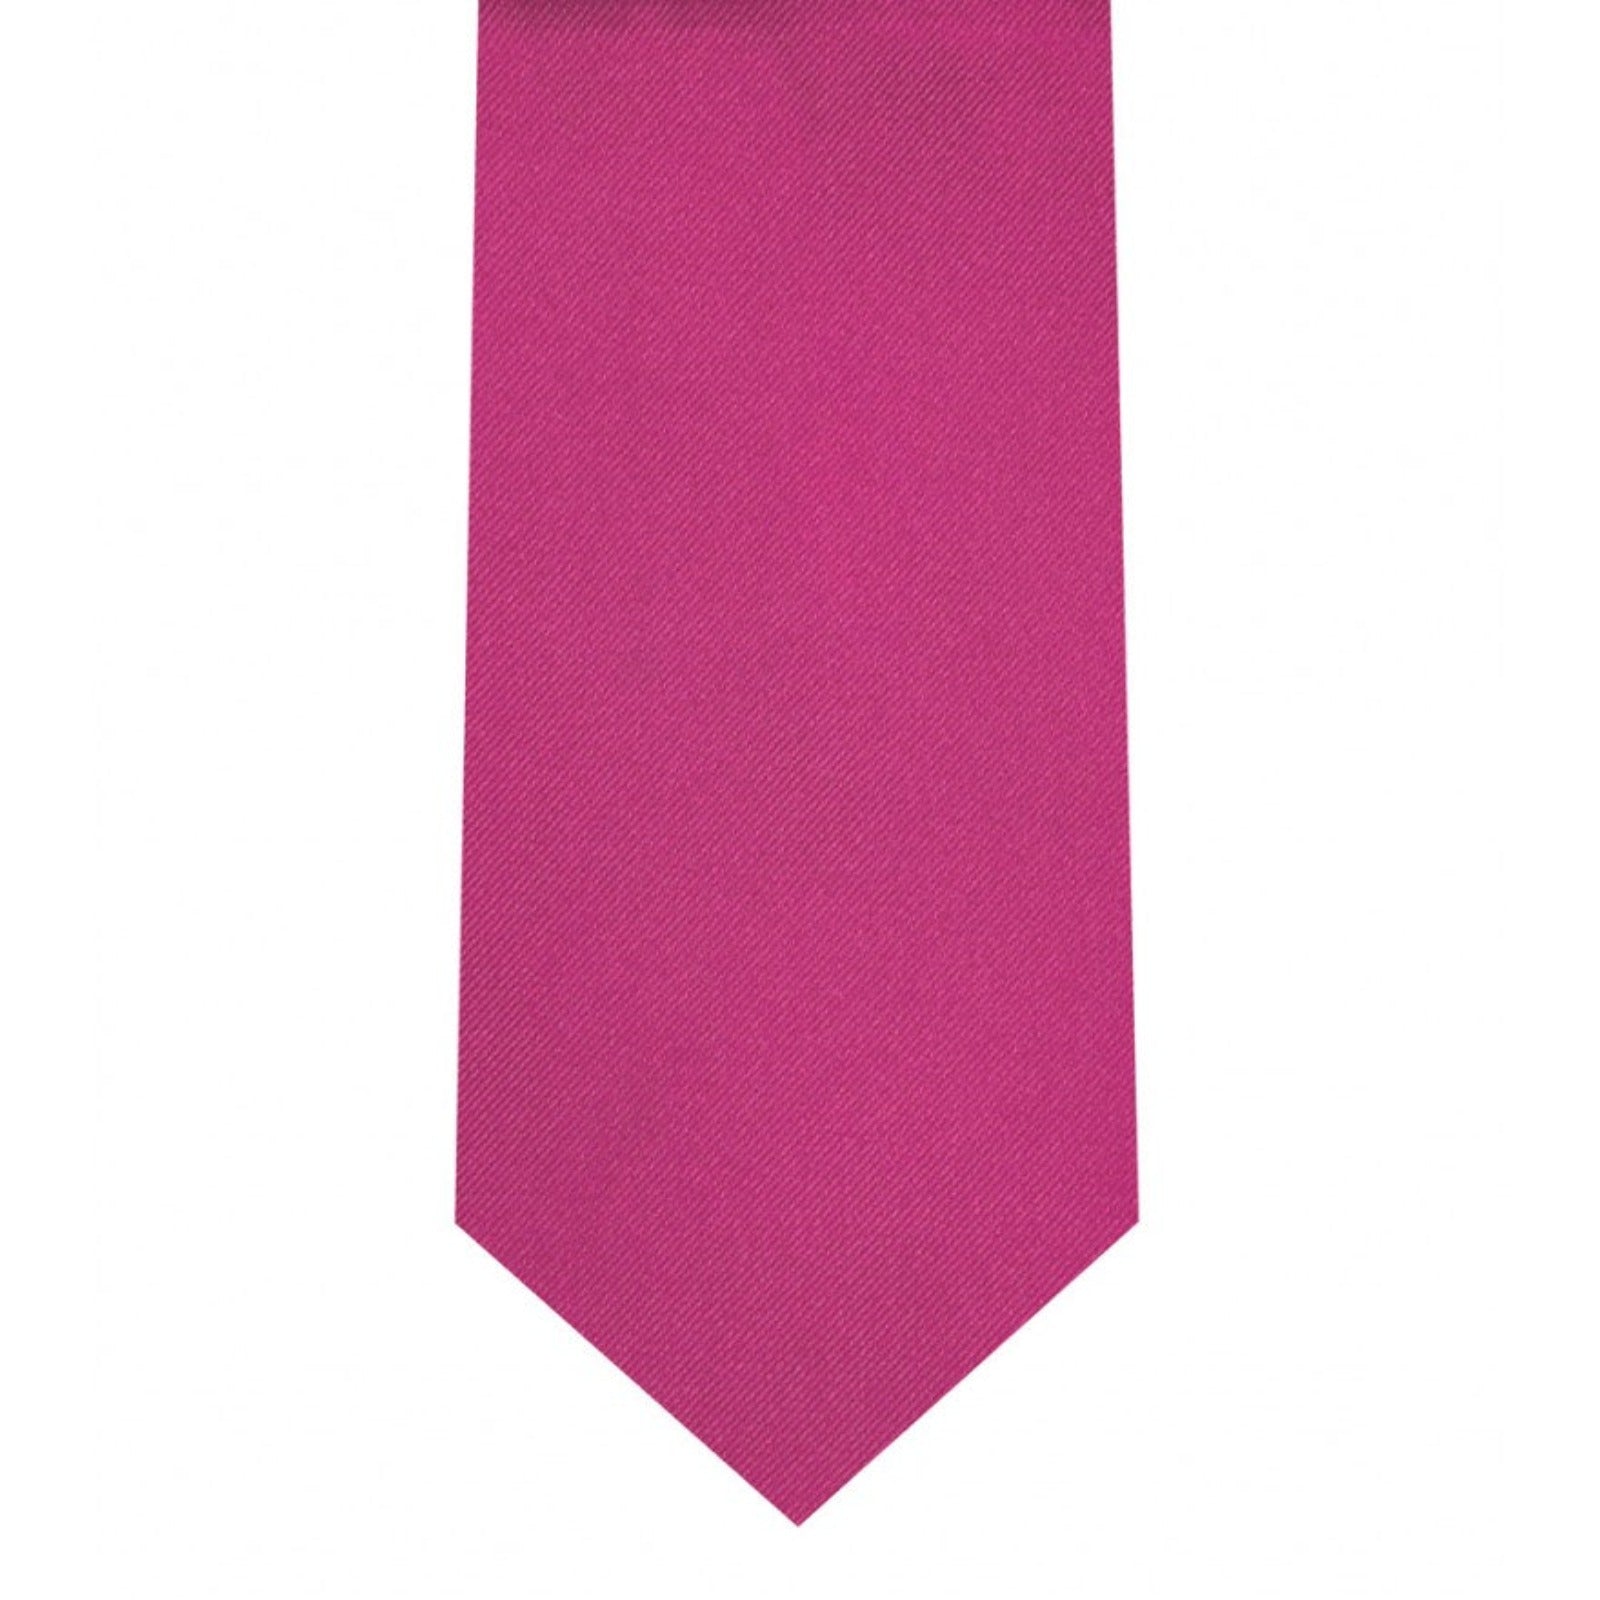 Classic Fuchsia Tie Skinny width 2.75 inches With Matching Pocket Square | KCT Menswear